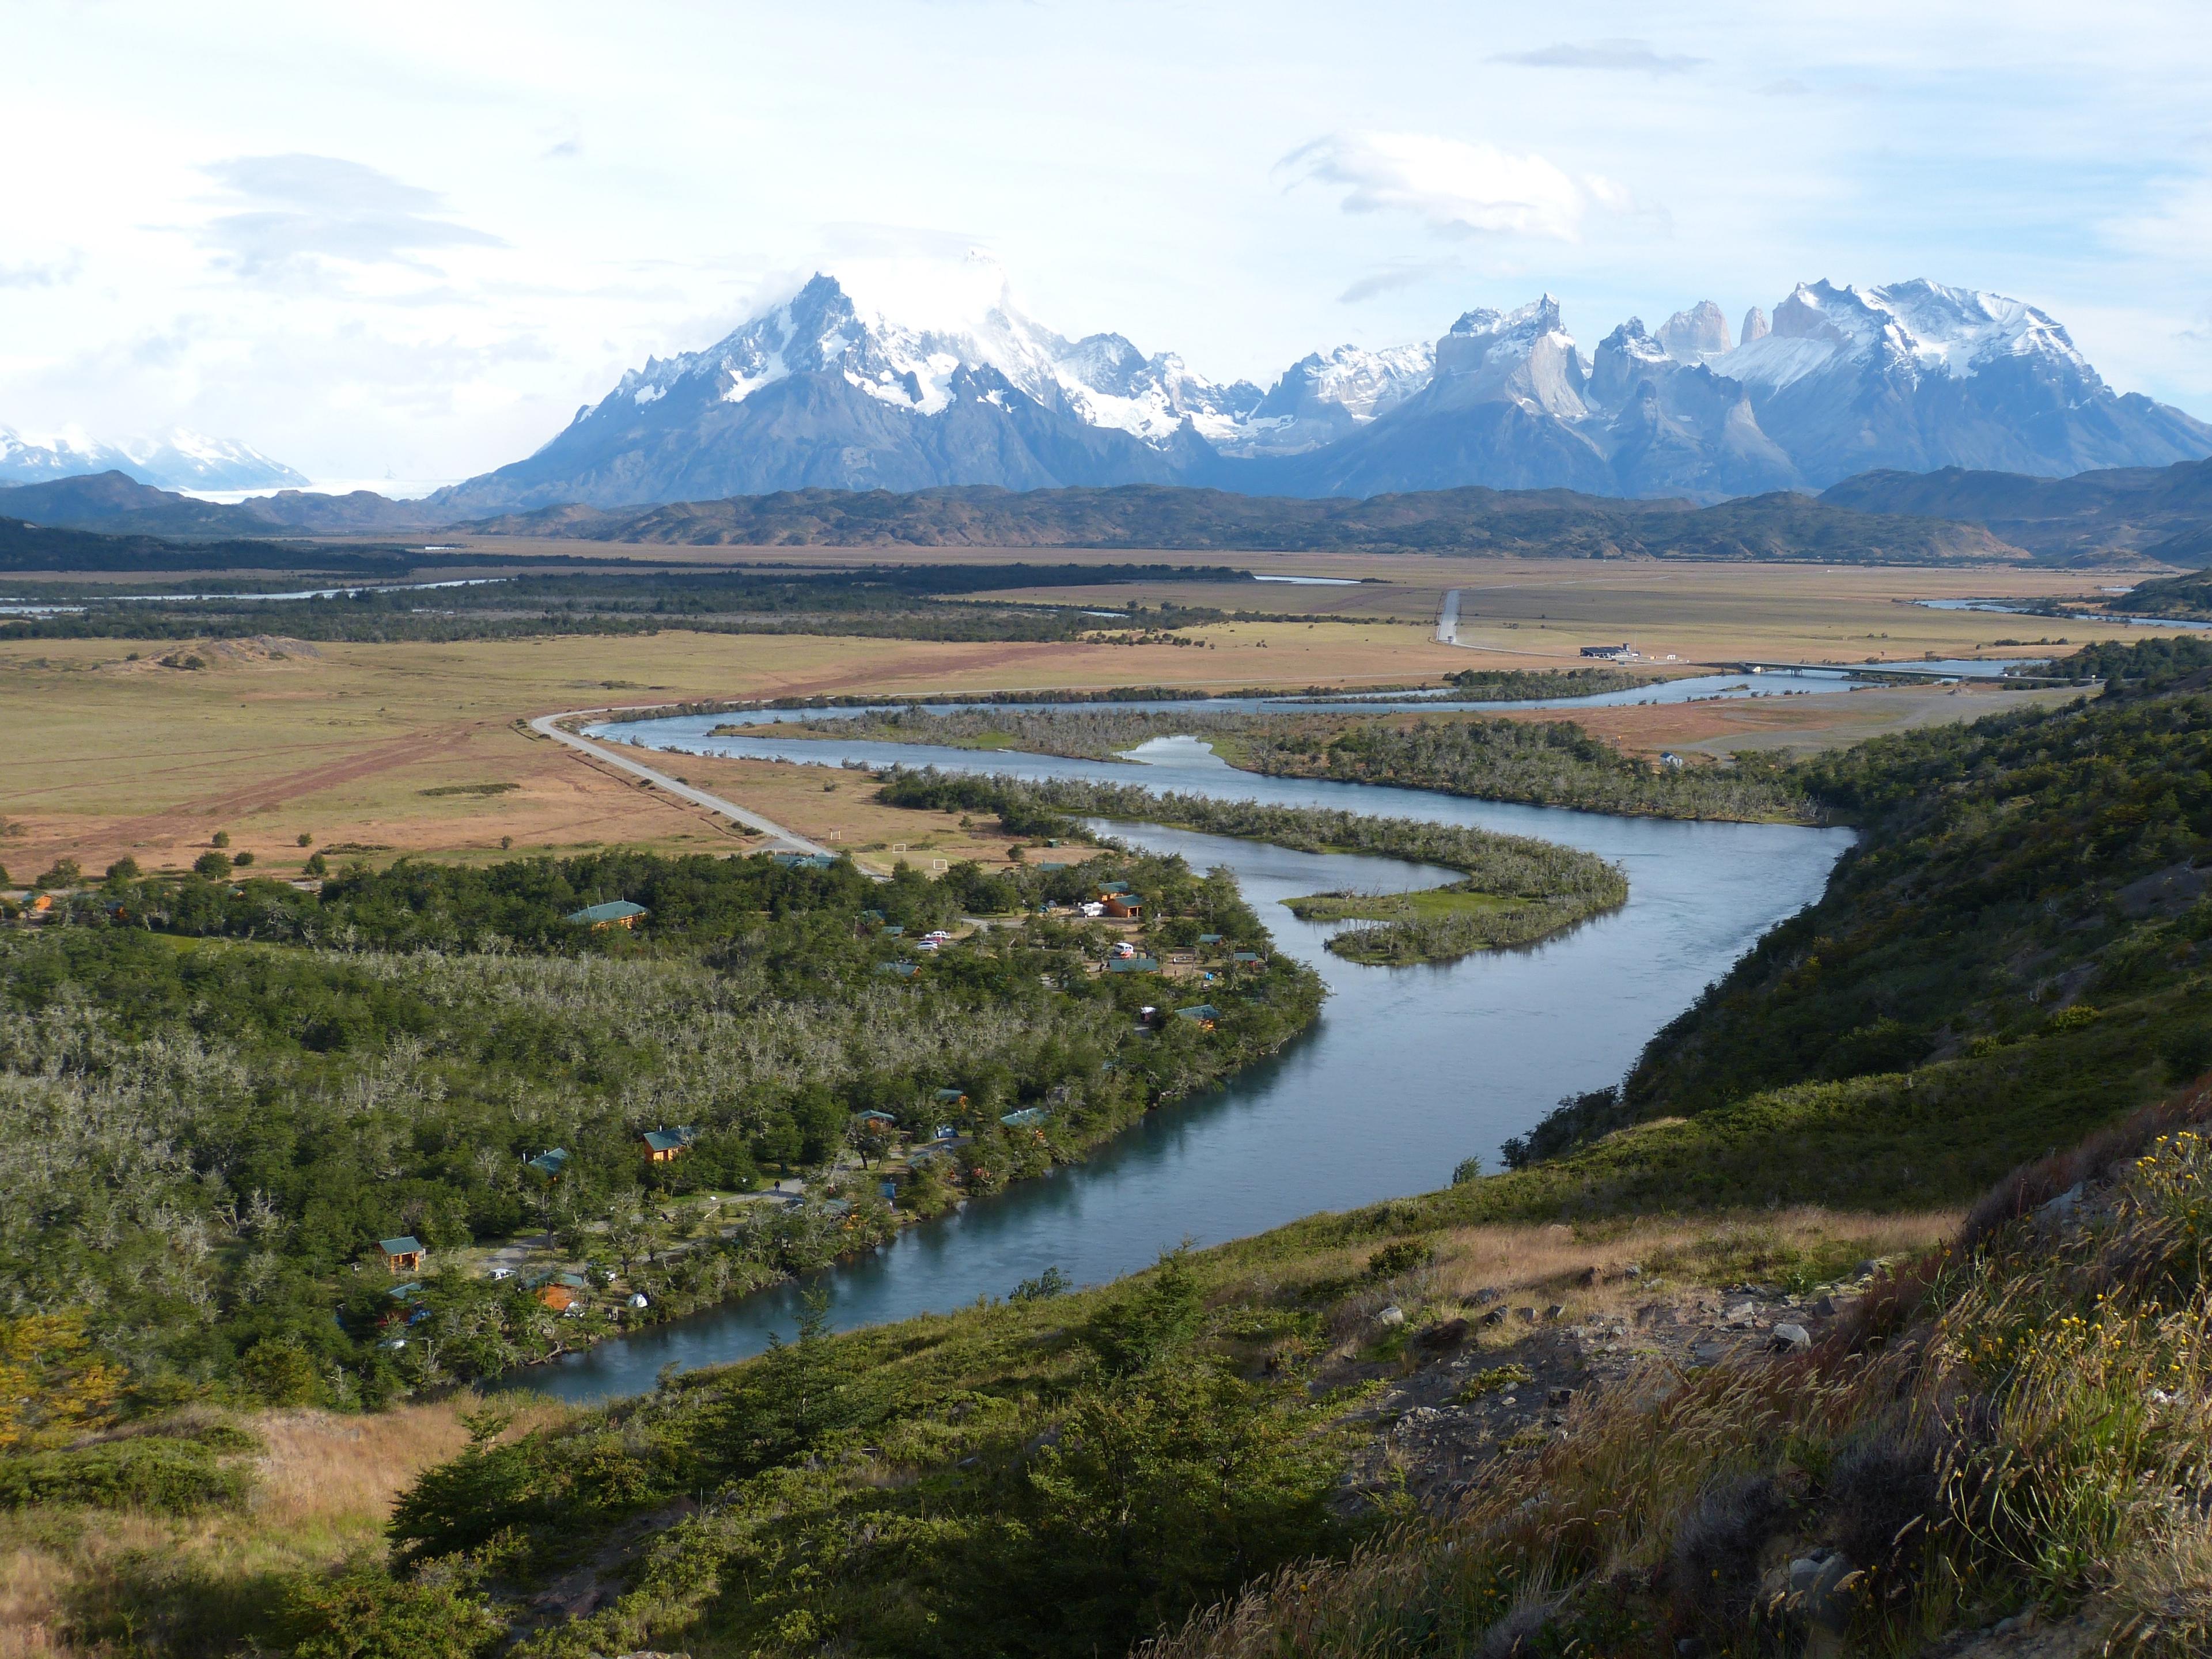 A Bespoke Southern Patagonia Experience for Two